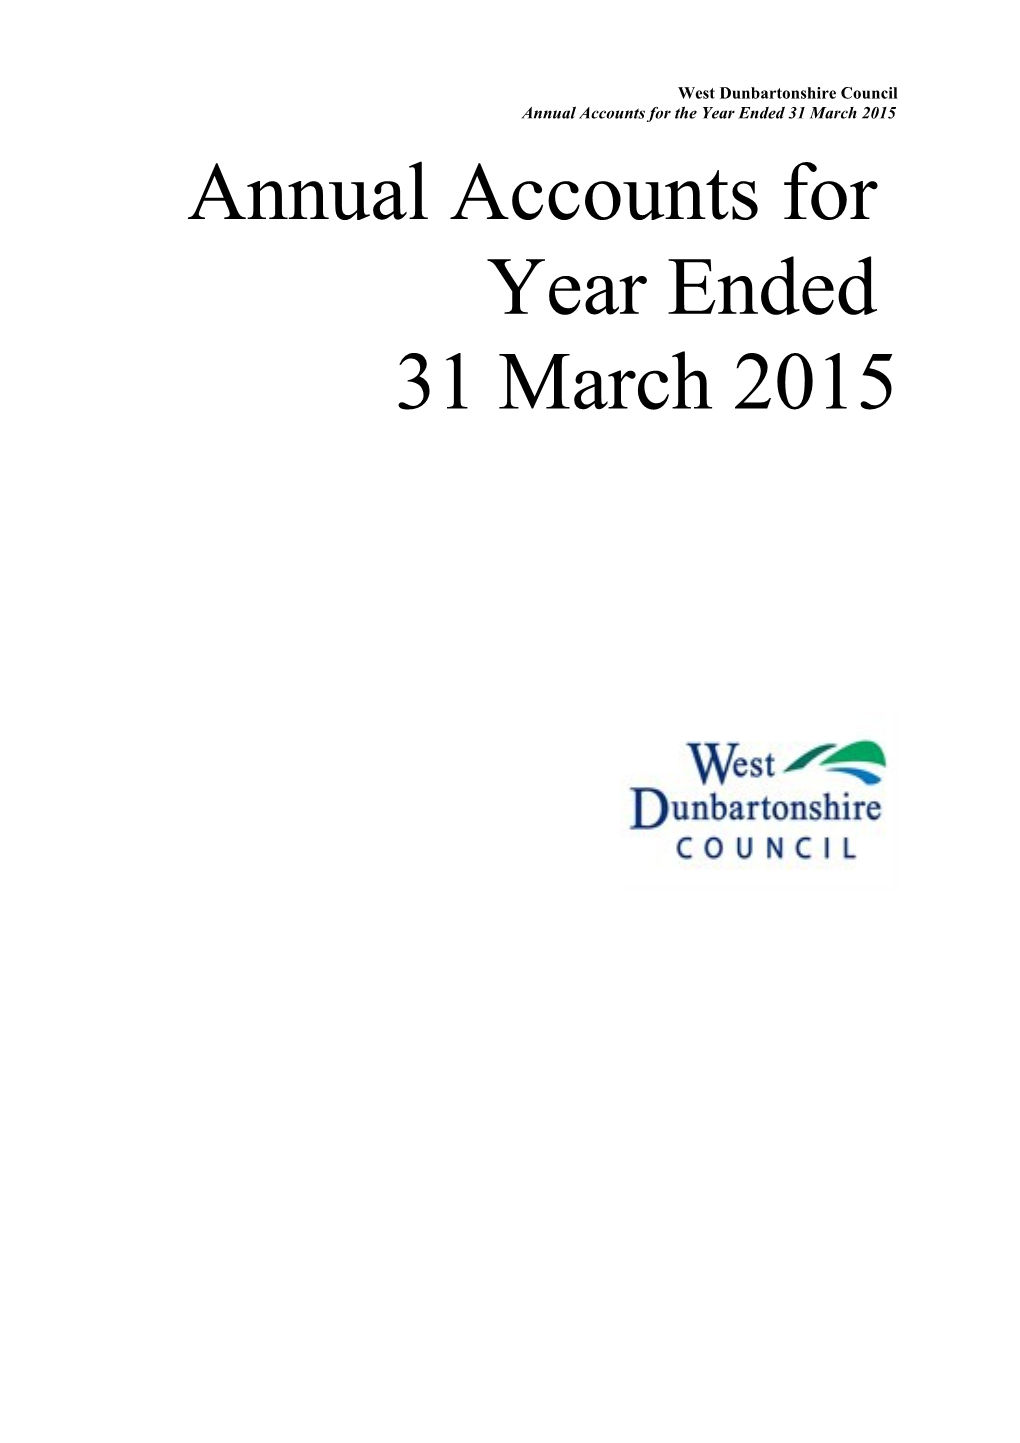 Annual Accounts for the Year Ended 31 March 2015